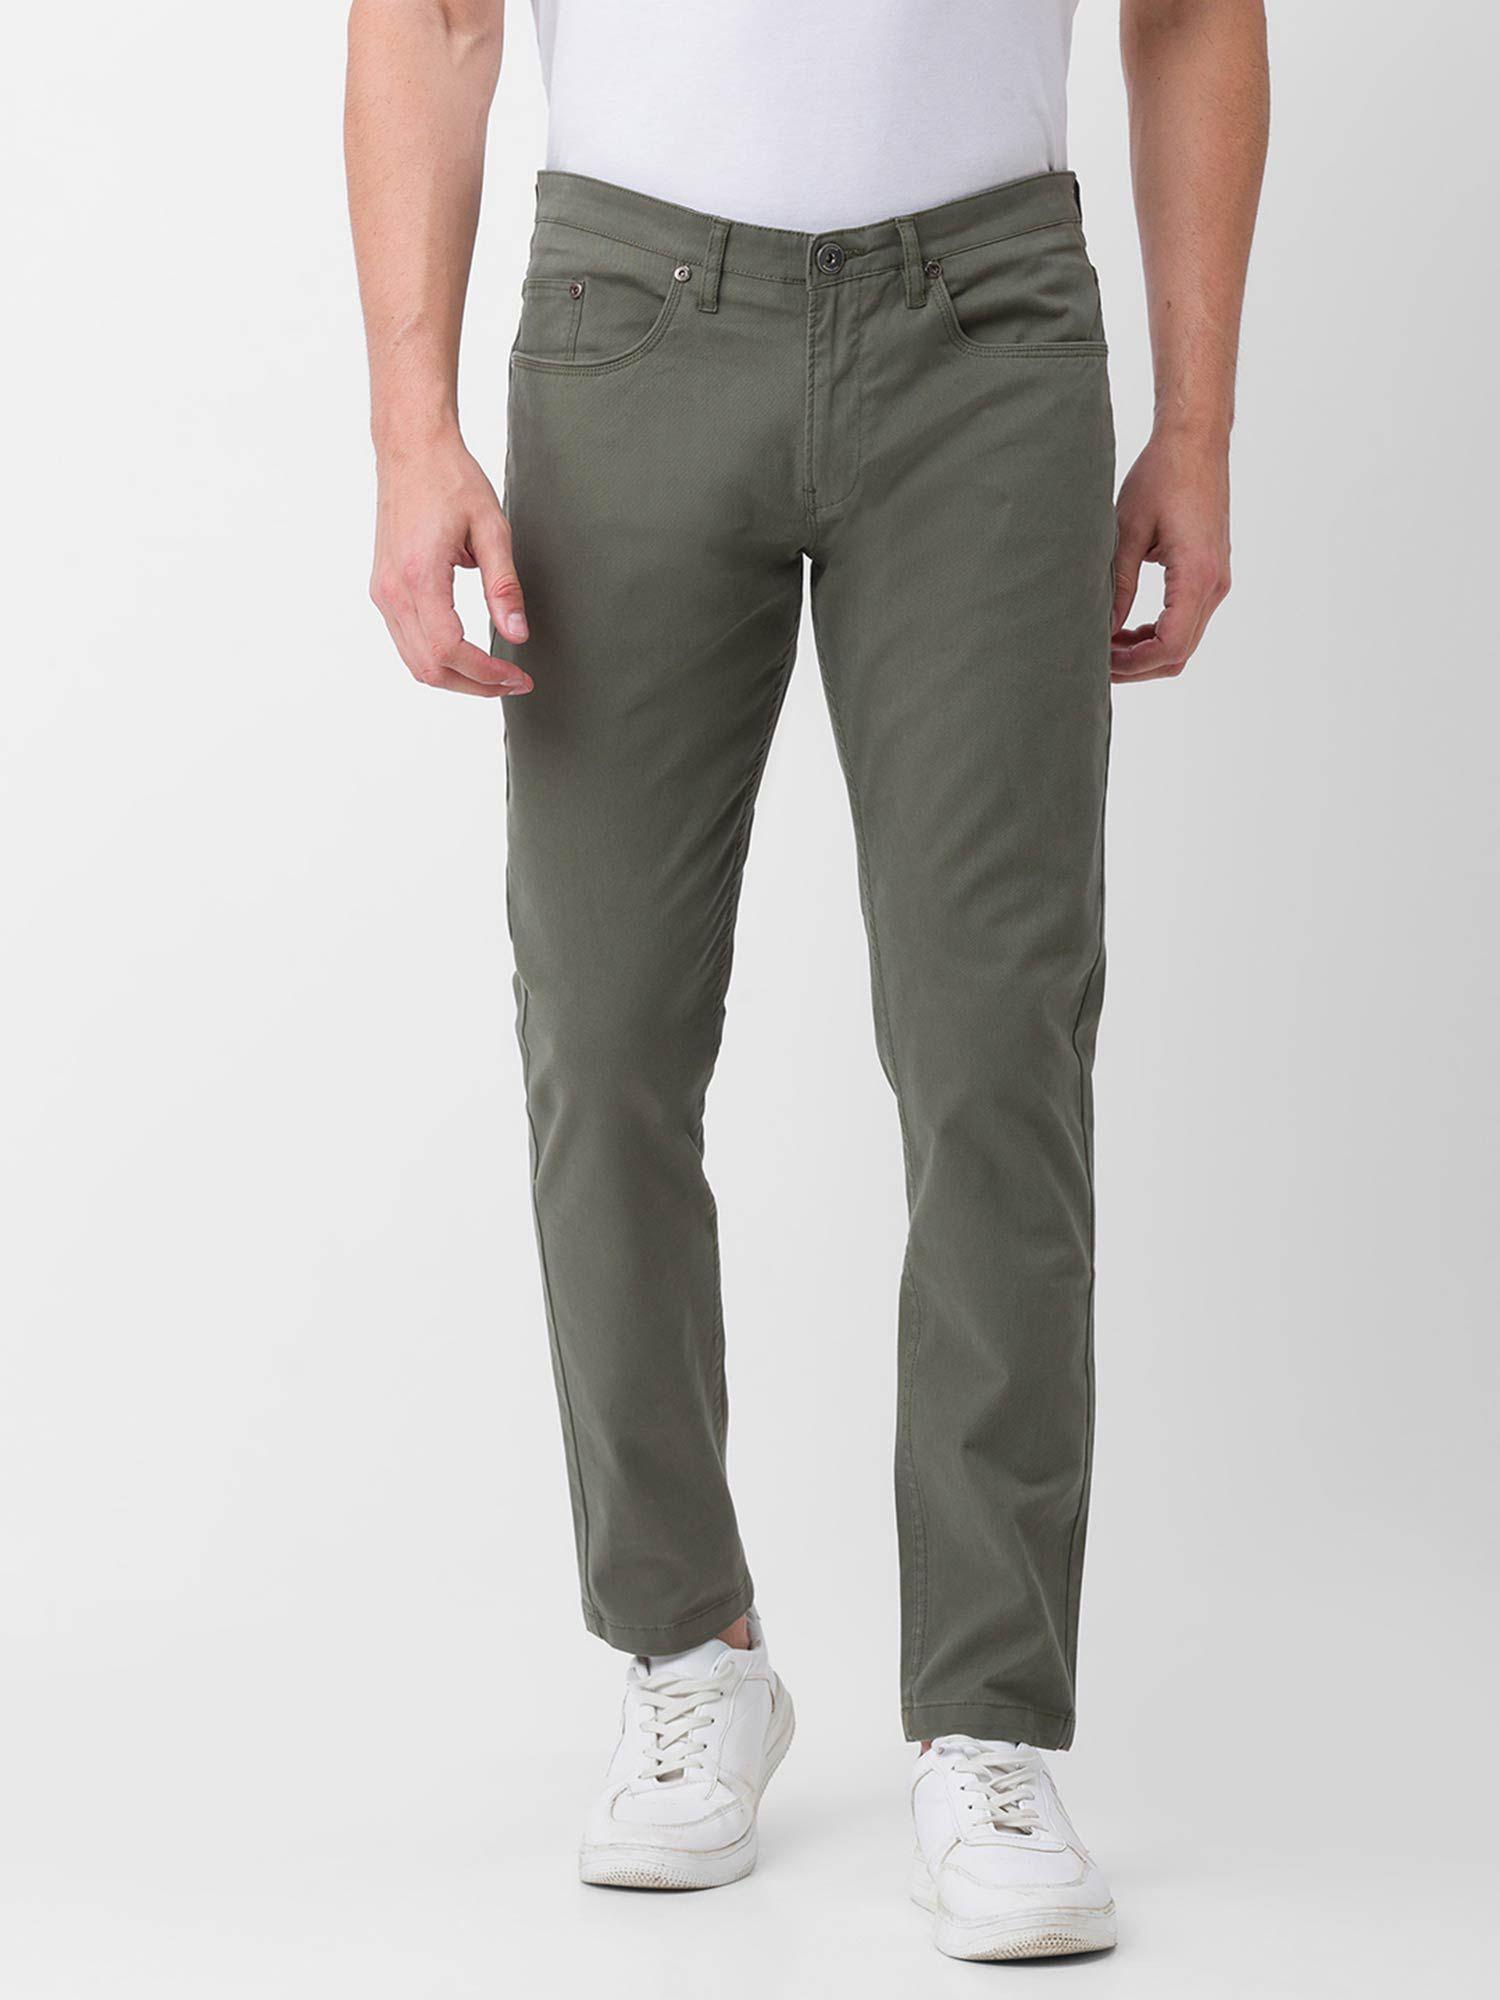 olive green cotton slim fit tapered length trousers for men